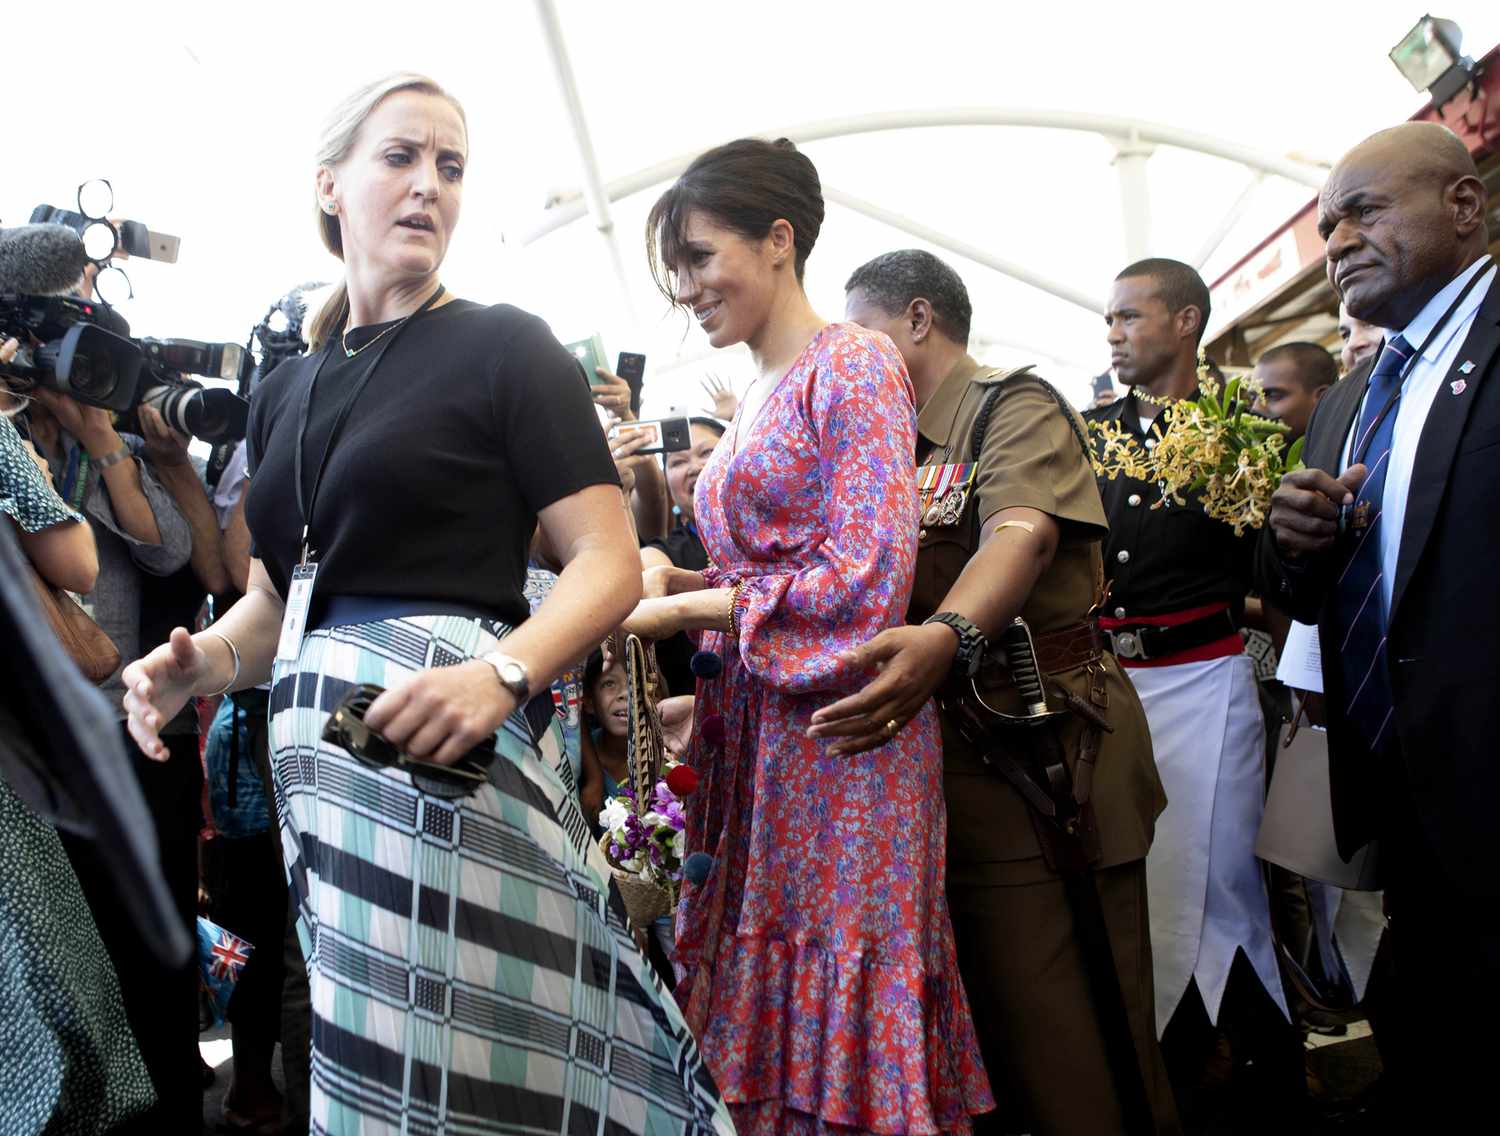 The Duke And Duchess Of Sussex Visit Fiji - Day 2